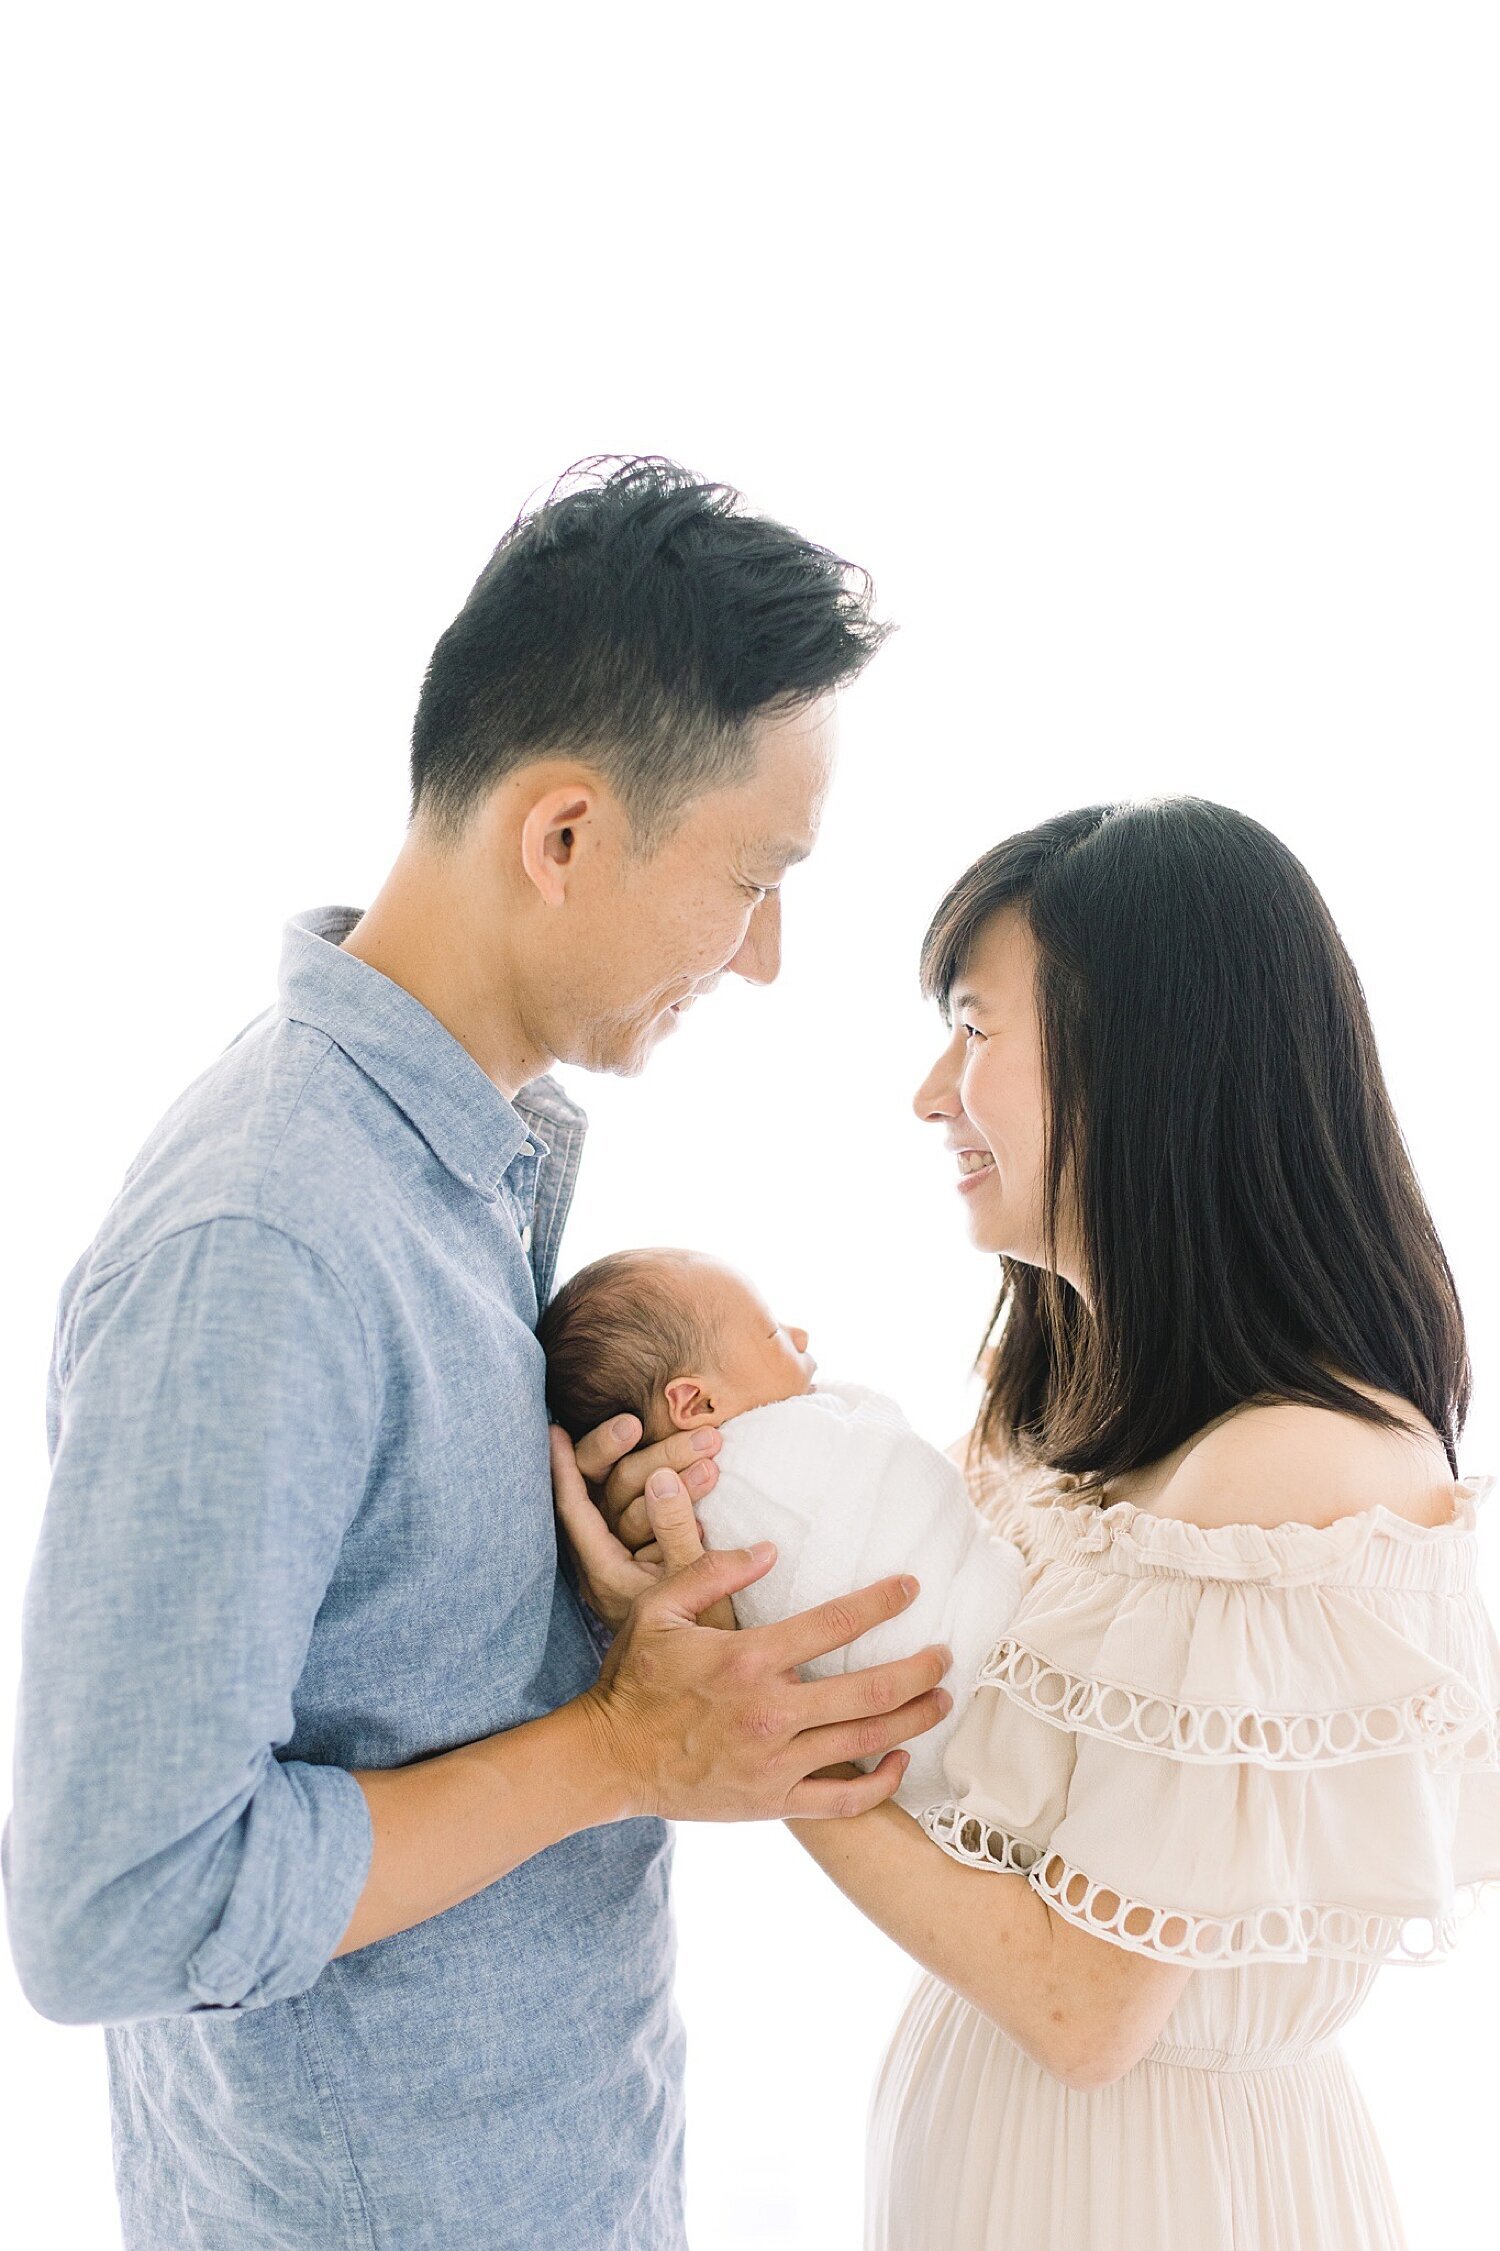 Mom and Dad with their newborn son in Newport Beach photography studio. Photo by Ambre Williams Photography.